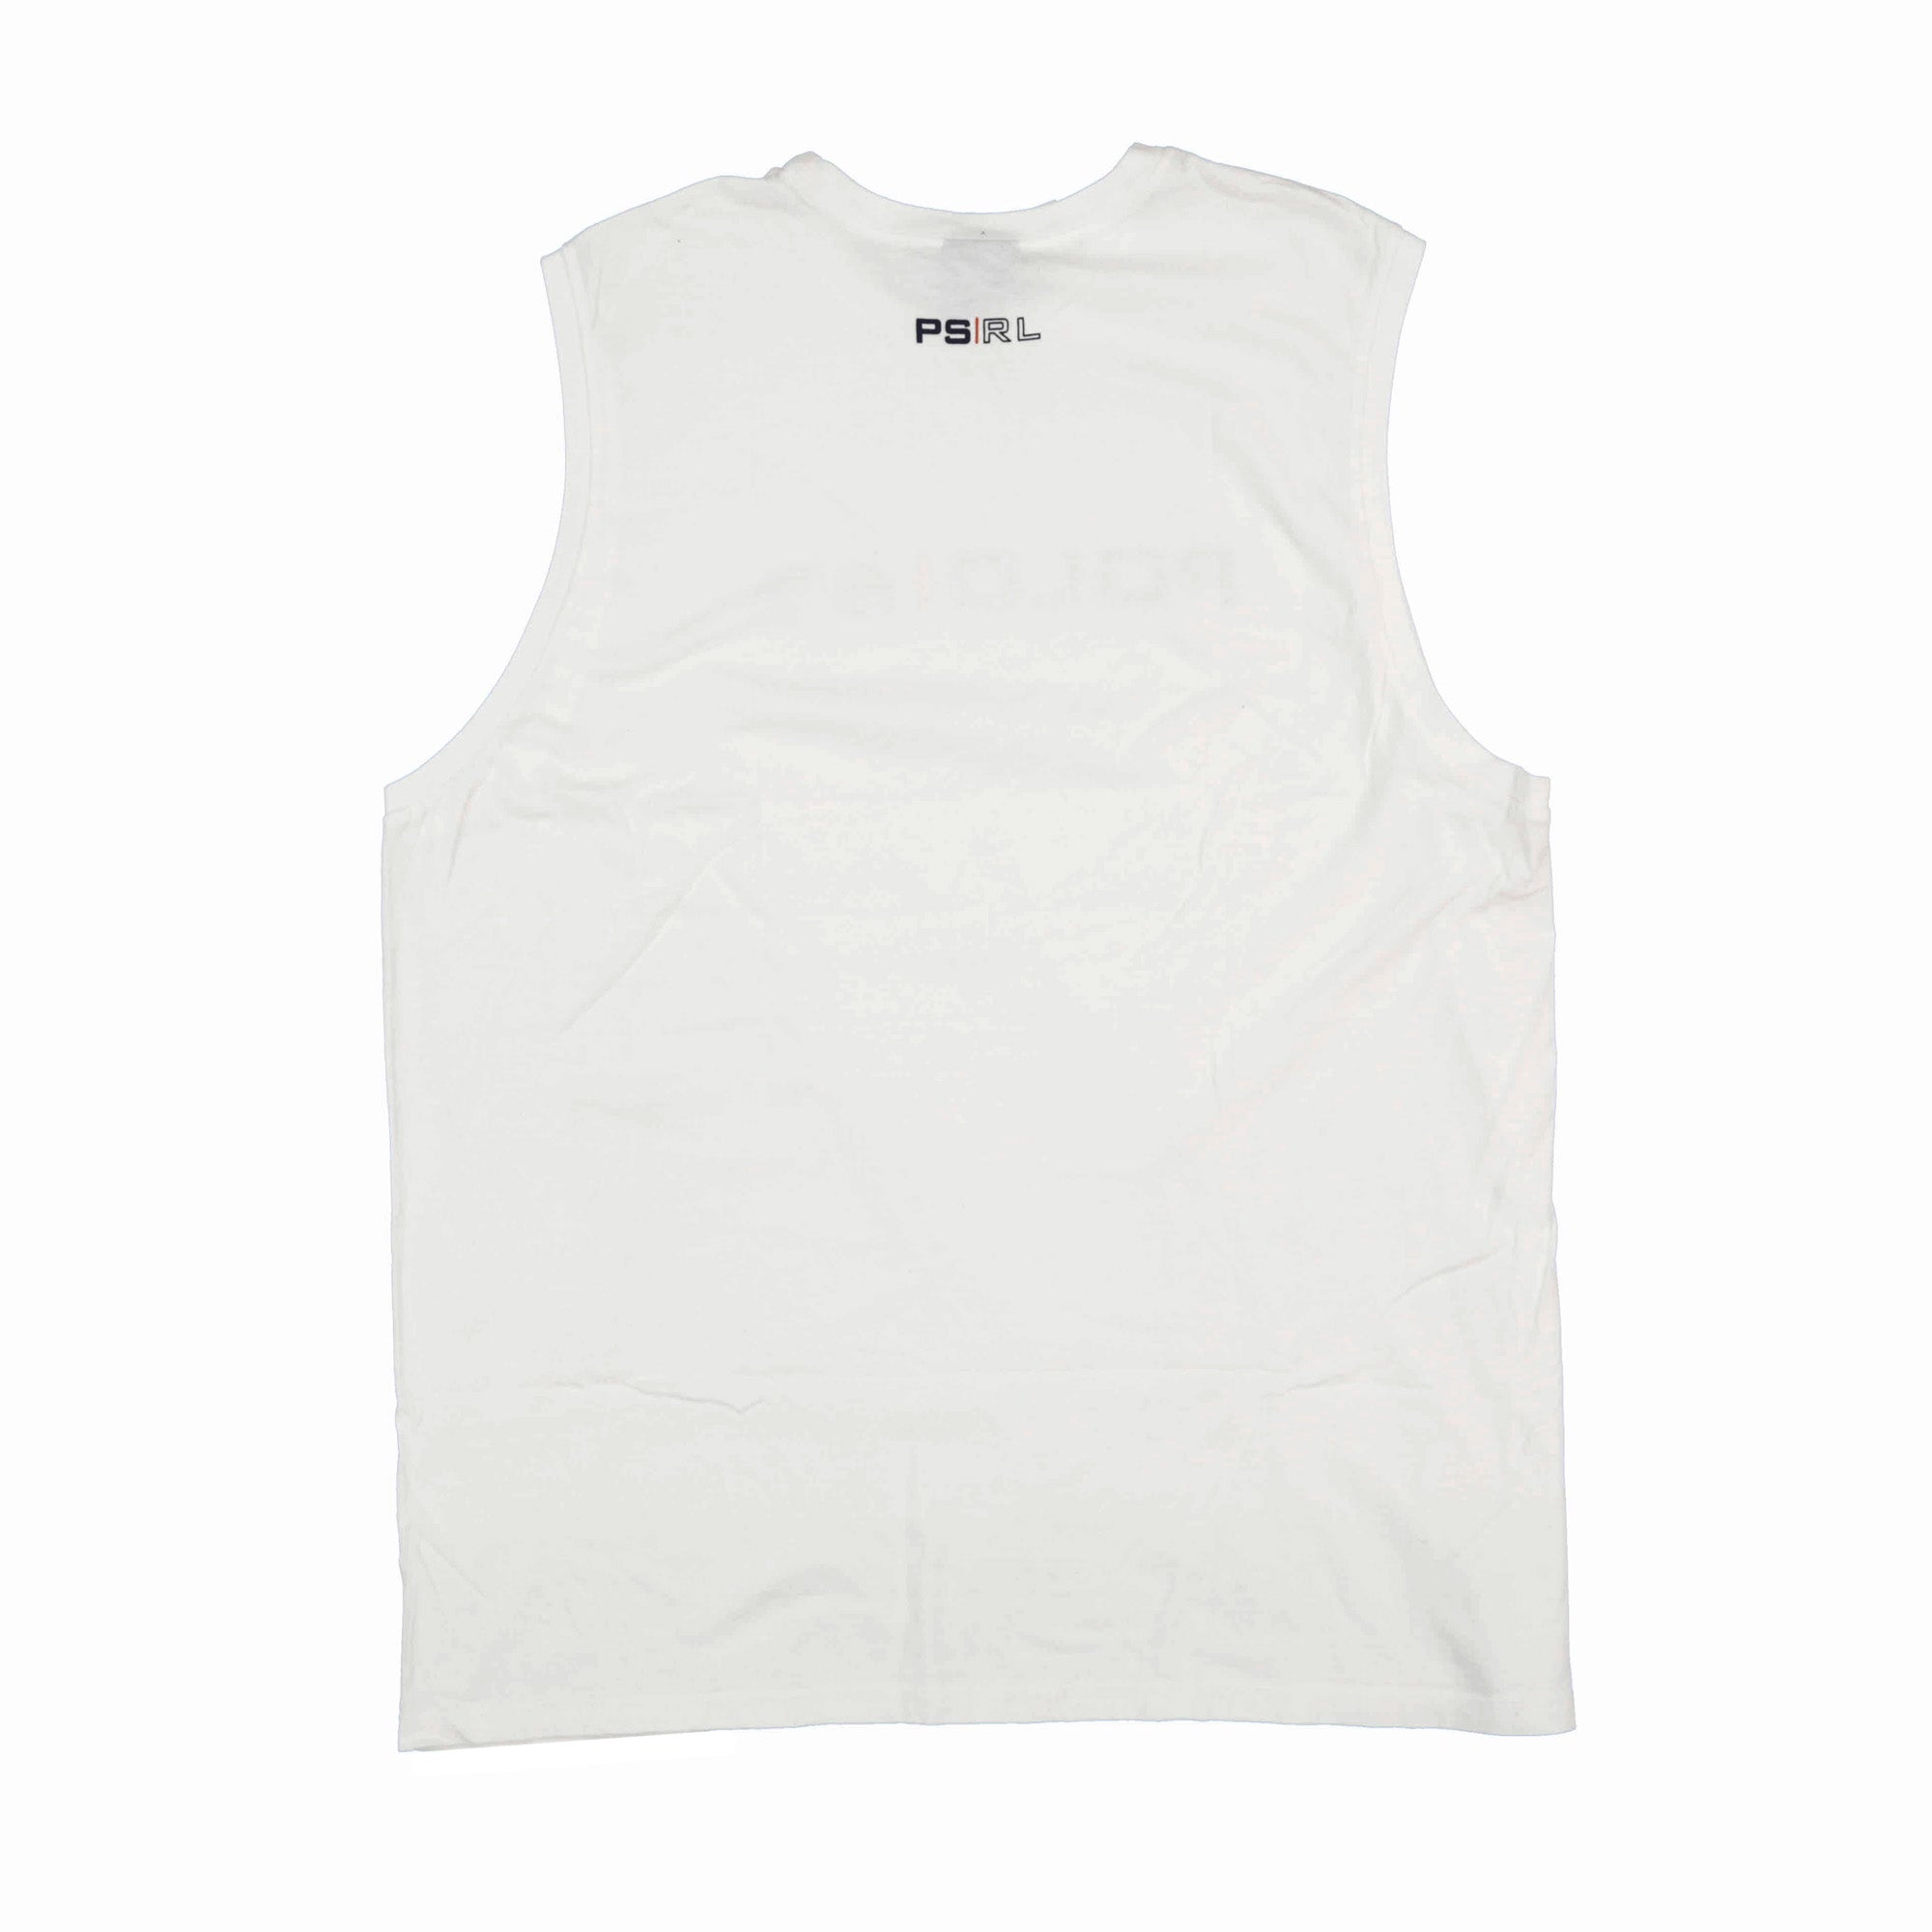 POLO SPORT SPELL OUT MUSCLE TANK TOP // WHITE